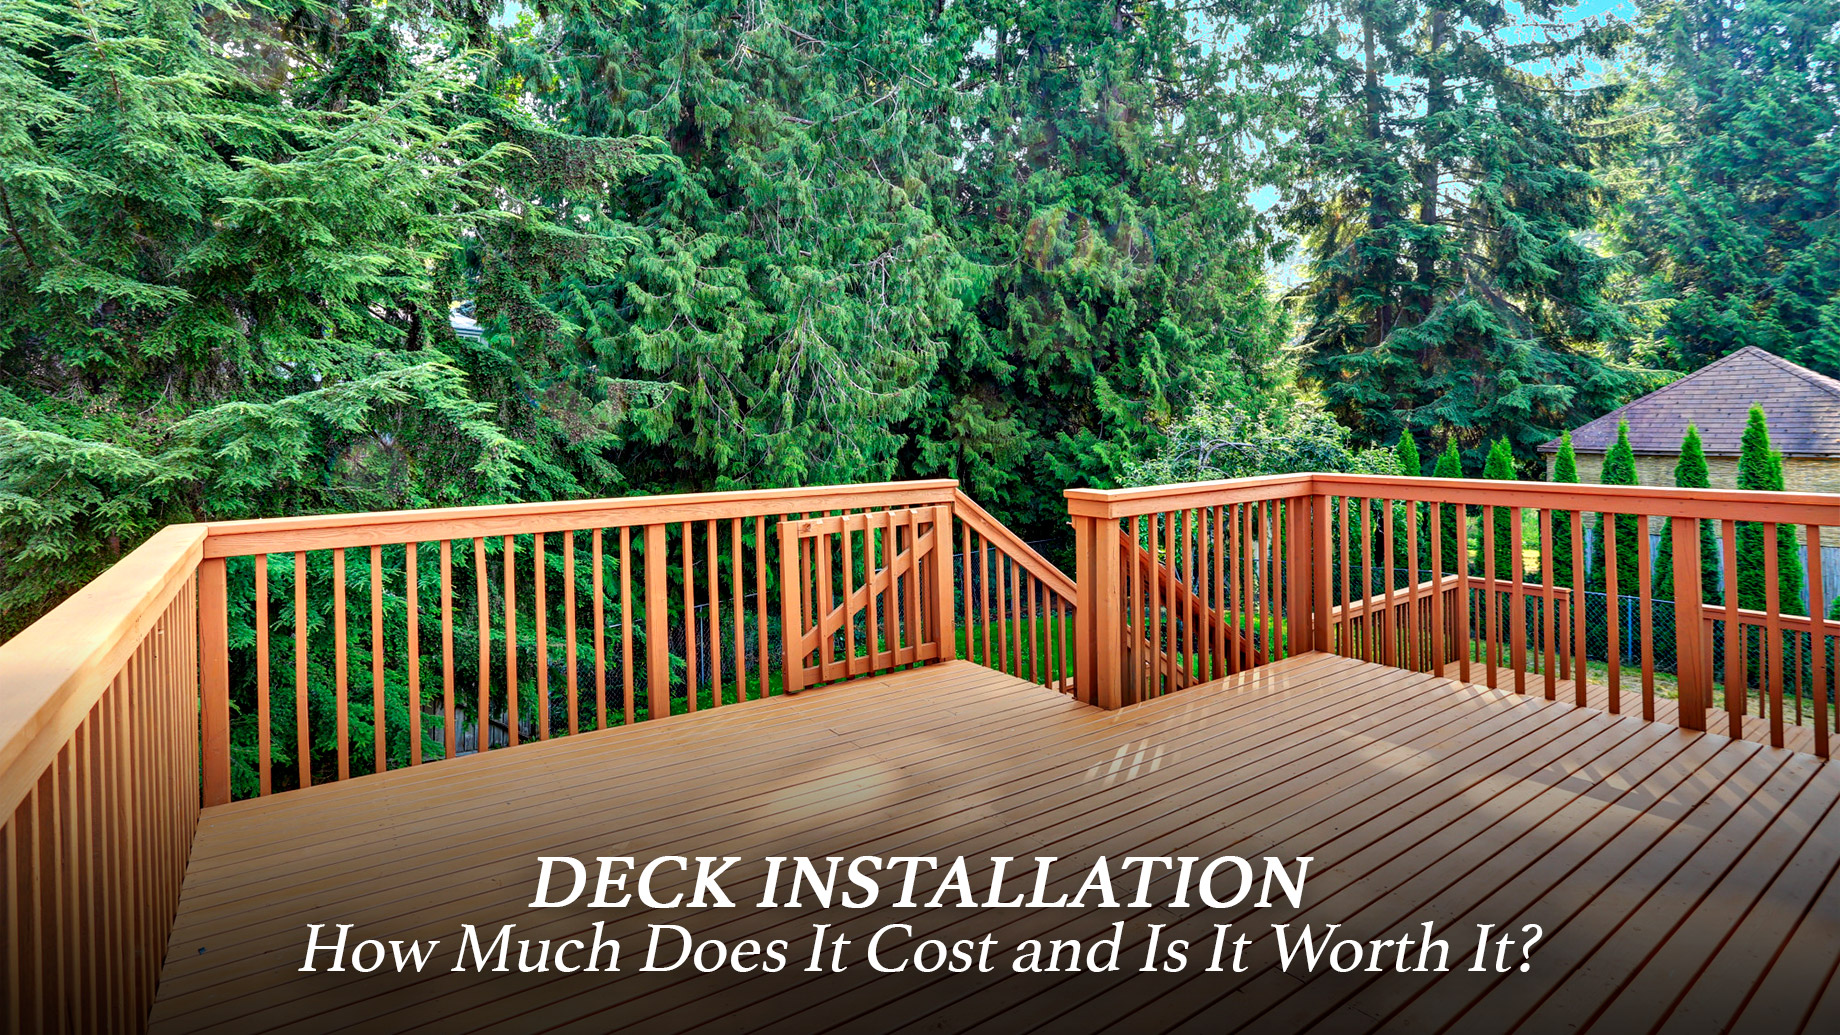 Deck Installation - How Much Does It Cost and Is It Worth It?